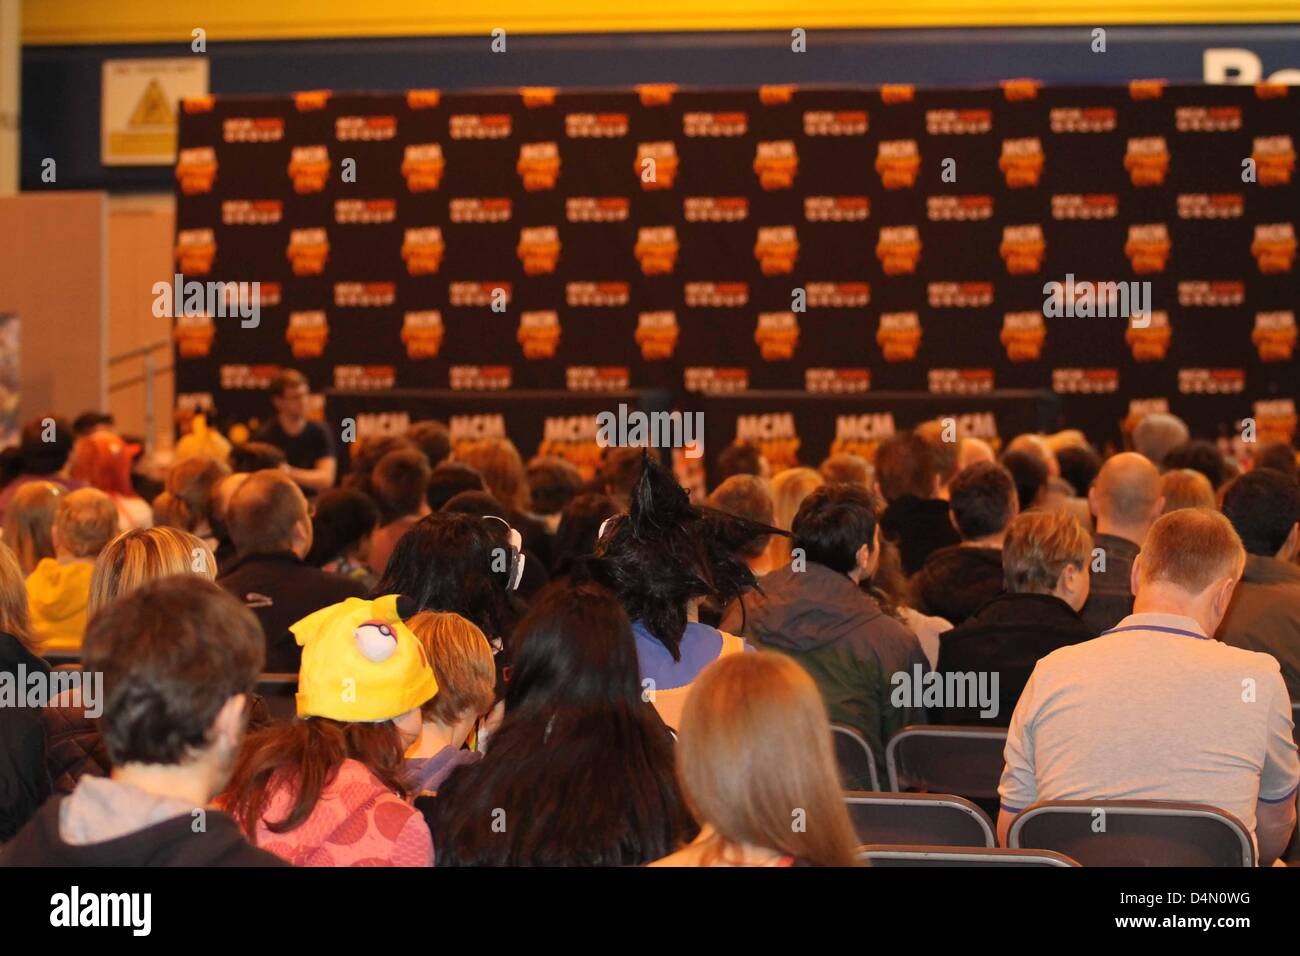 Birmingham, UK. 16th March 2013. Fans wait in anticipation for Jaime Murray and Tony Curran, who are stars of defiance, at Birmingham MCM Expo Credit: Ryan McDowell/ Alamy Live News Stock Photo